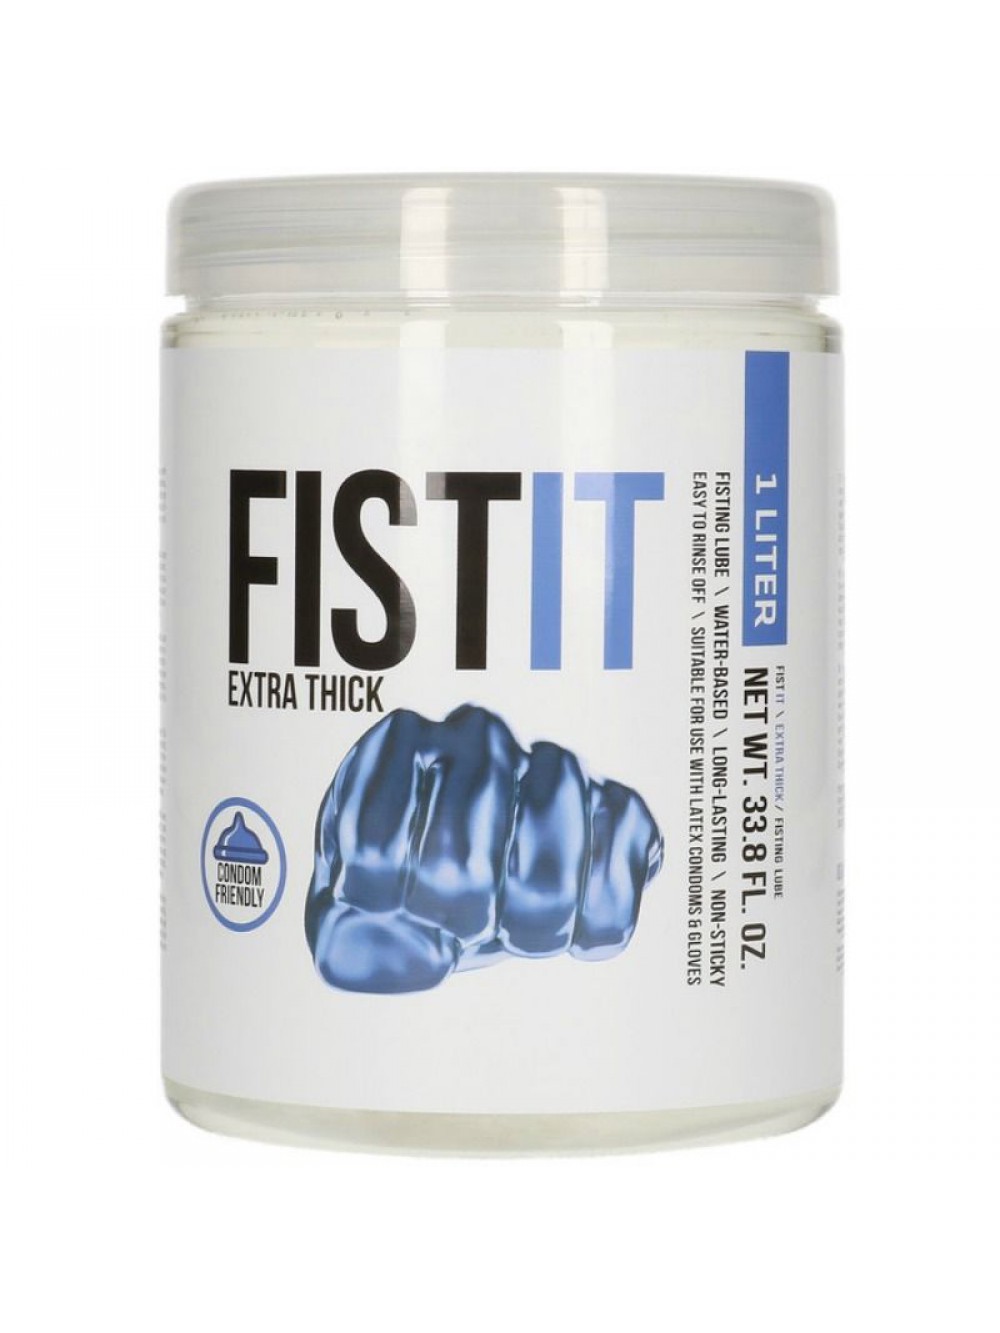 PHARMQUESTS WATER-BASED LUBRICANT FIST-IT EXTRA THICK 1000 ML 8714273301956